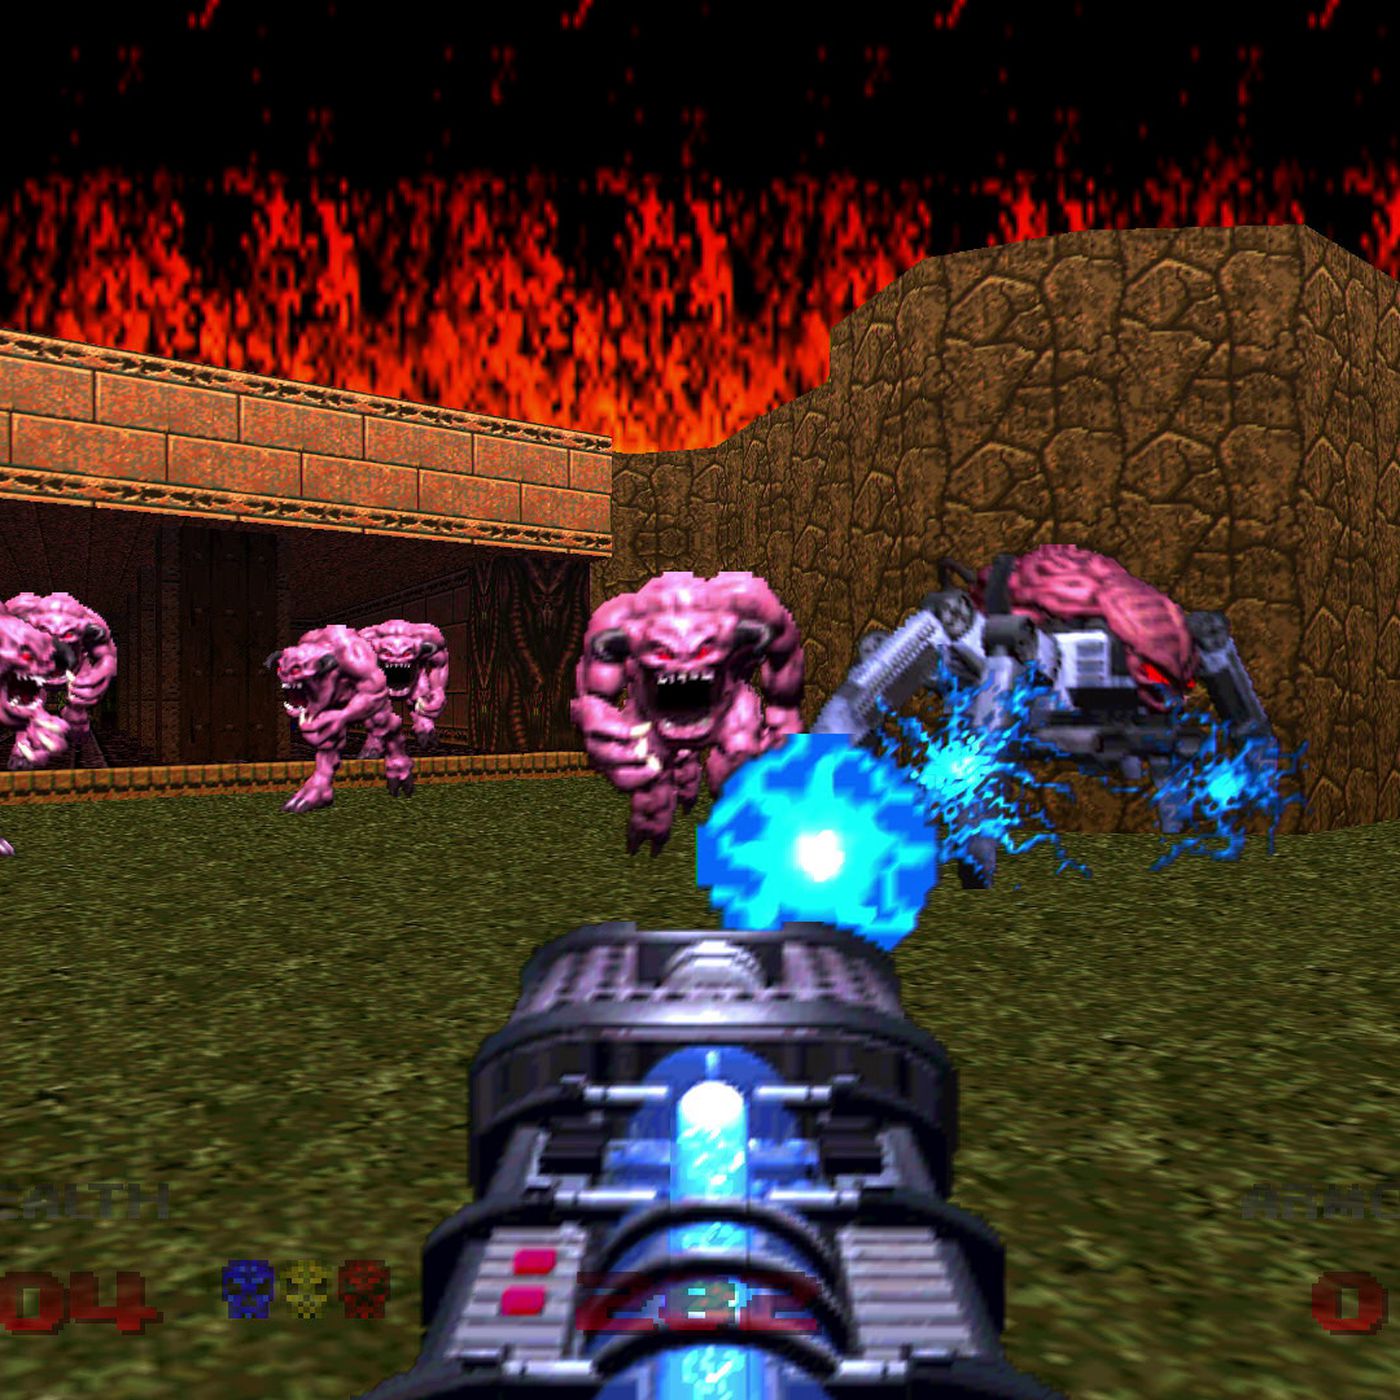 How lost classic Doom 64 was revived for modern platforms - The Verge